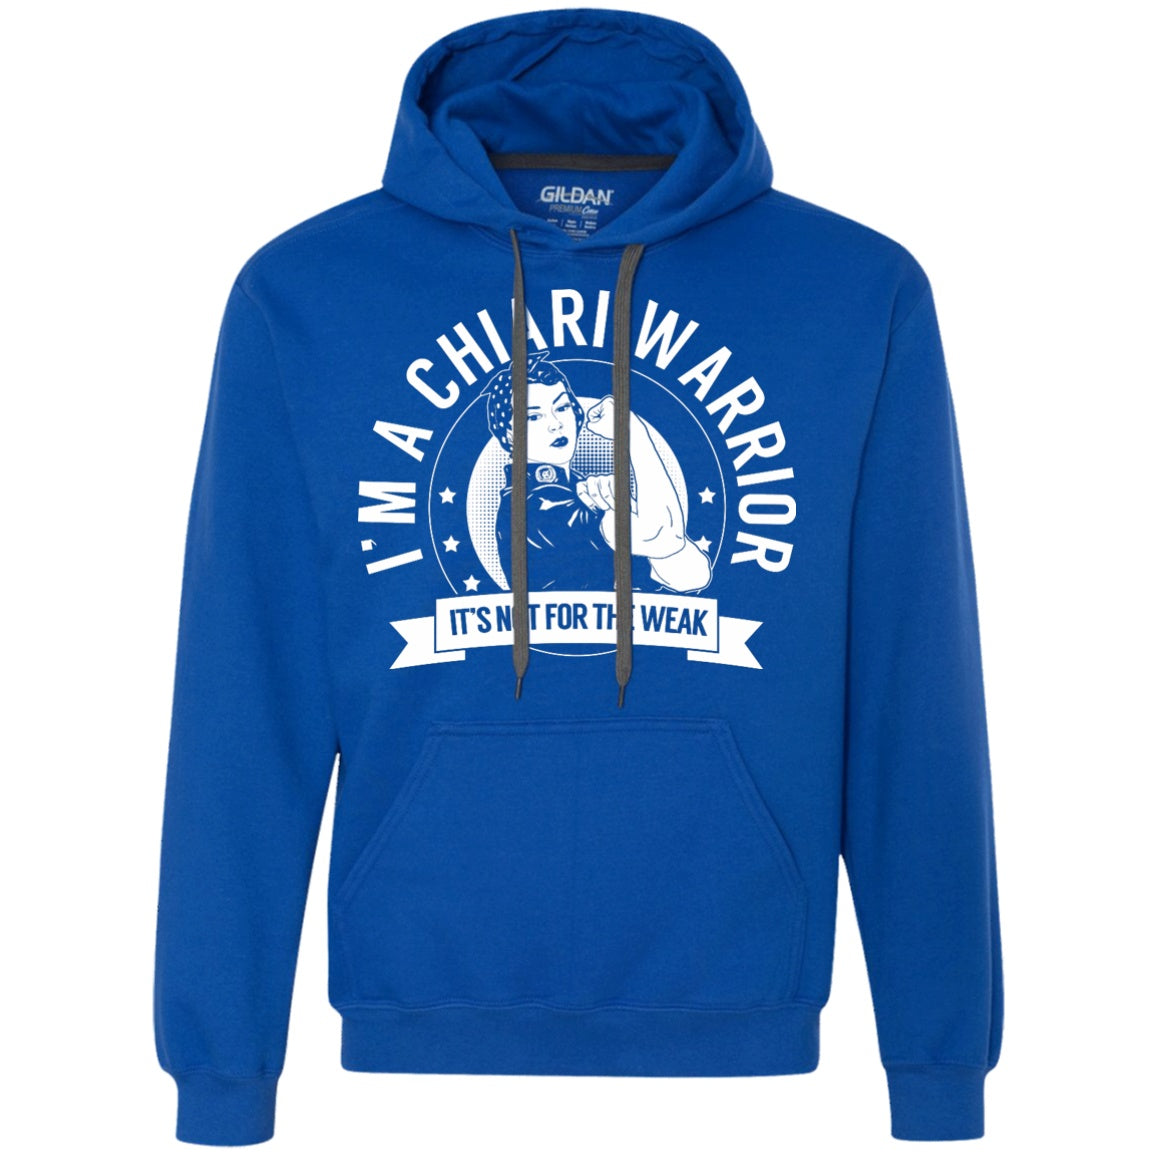 Chiari Warrior Not for the Weak Pullover Hoodie 9 oz. - The Unchargeables